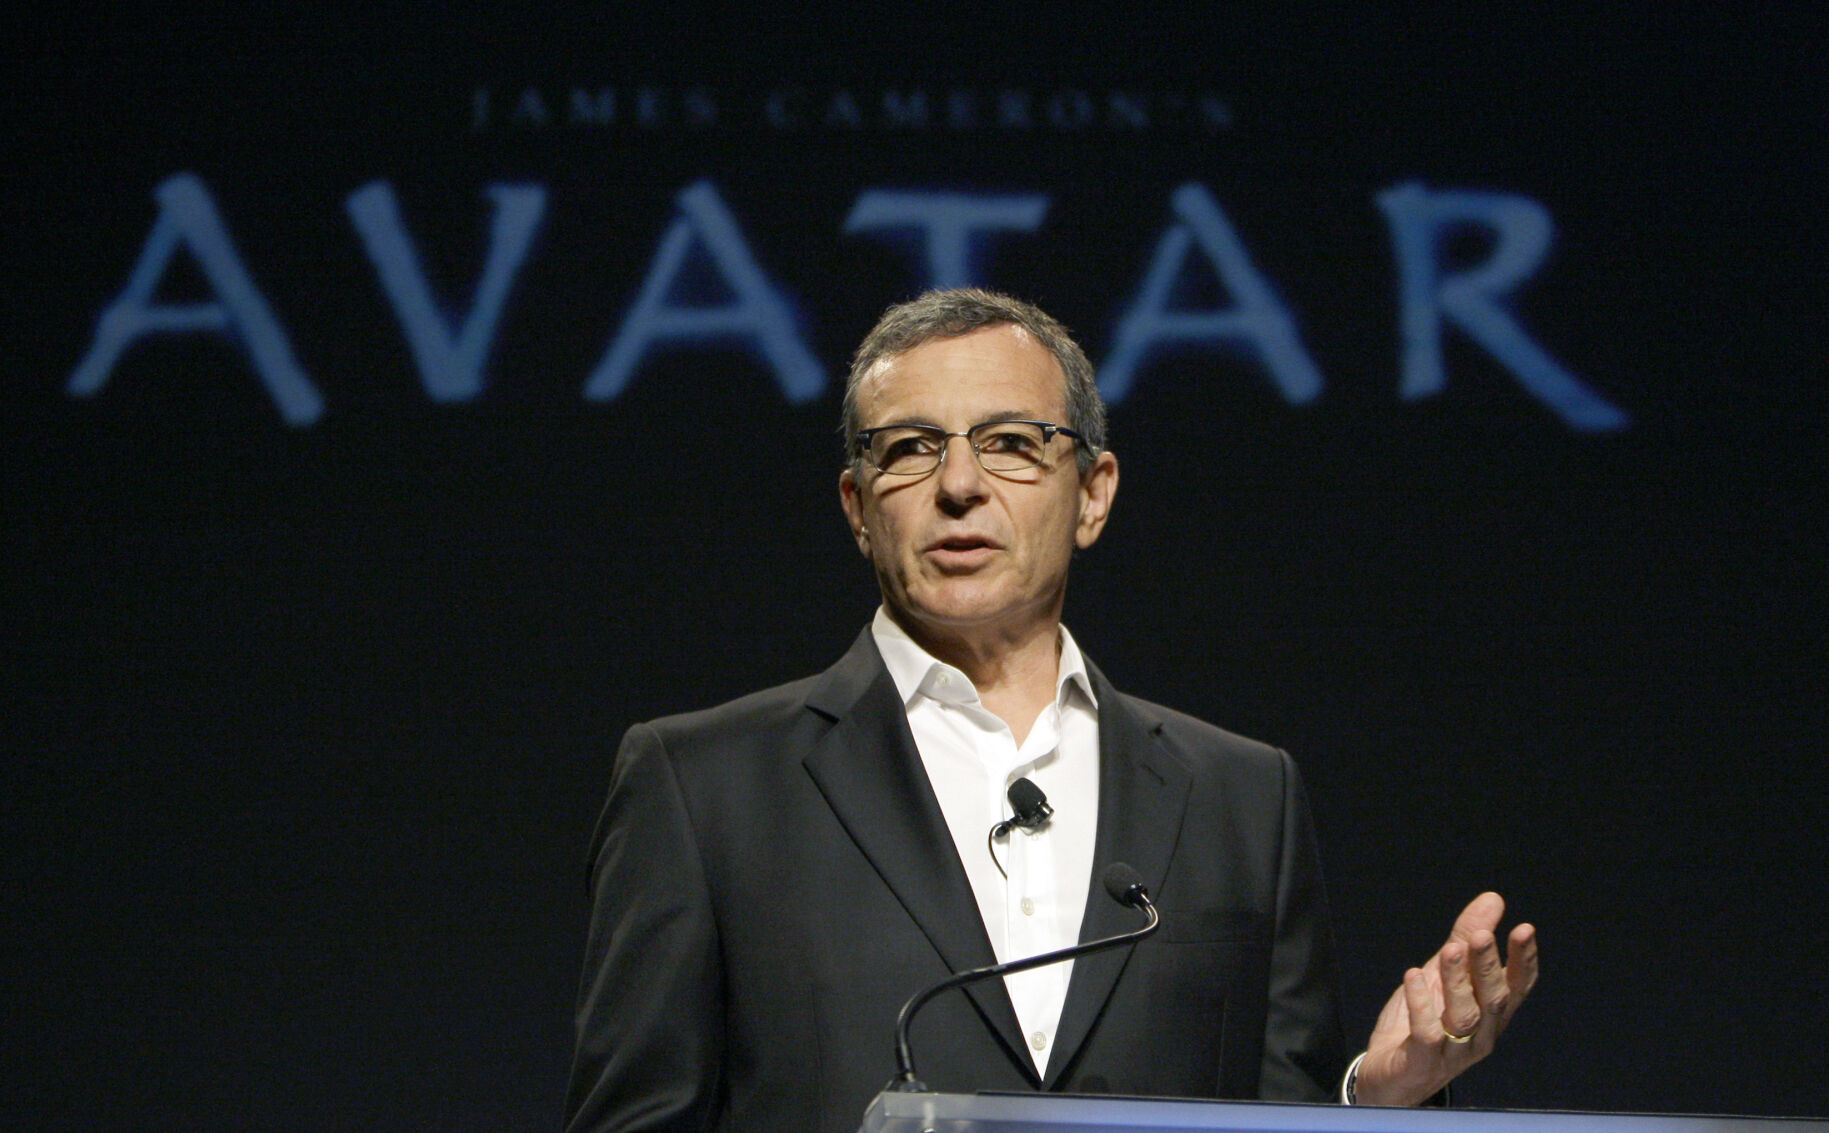 <p>FILE - Robert Iger, president and CEO of the Walt Disney Company, speaks at a news conference at Disney Imagineering in Glendale, Calif., Sept. 20, 2011. The Walt Disney Co. is planning to add an Avatar experience to Disneyland and explore other opportunities at its theme parks as it looks for more ways to appeal to its guests. Iger said during the company’s first-quarter earnings call that the success of the latest Avatar film is spurring the creation of an Avatar experience at Disneyland in California. (AP Photo/Reed Saxon, file)</p>   PHOTO CREDIT: Reed Saxon 